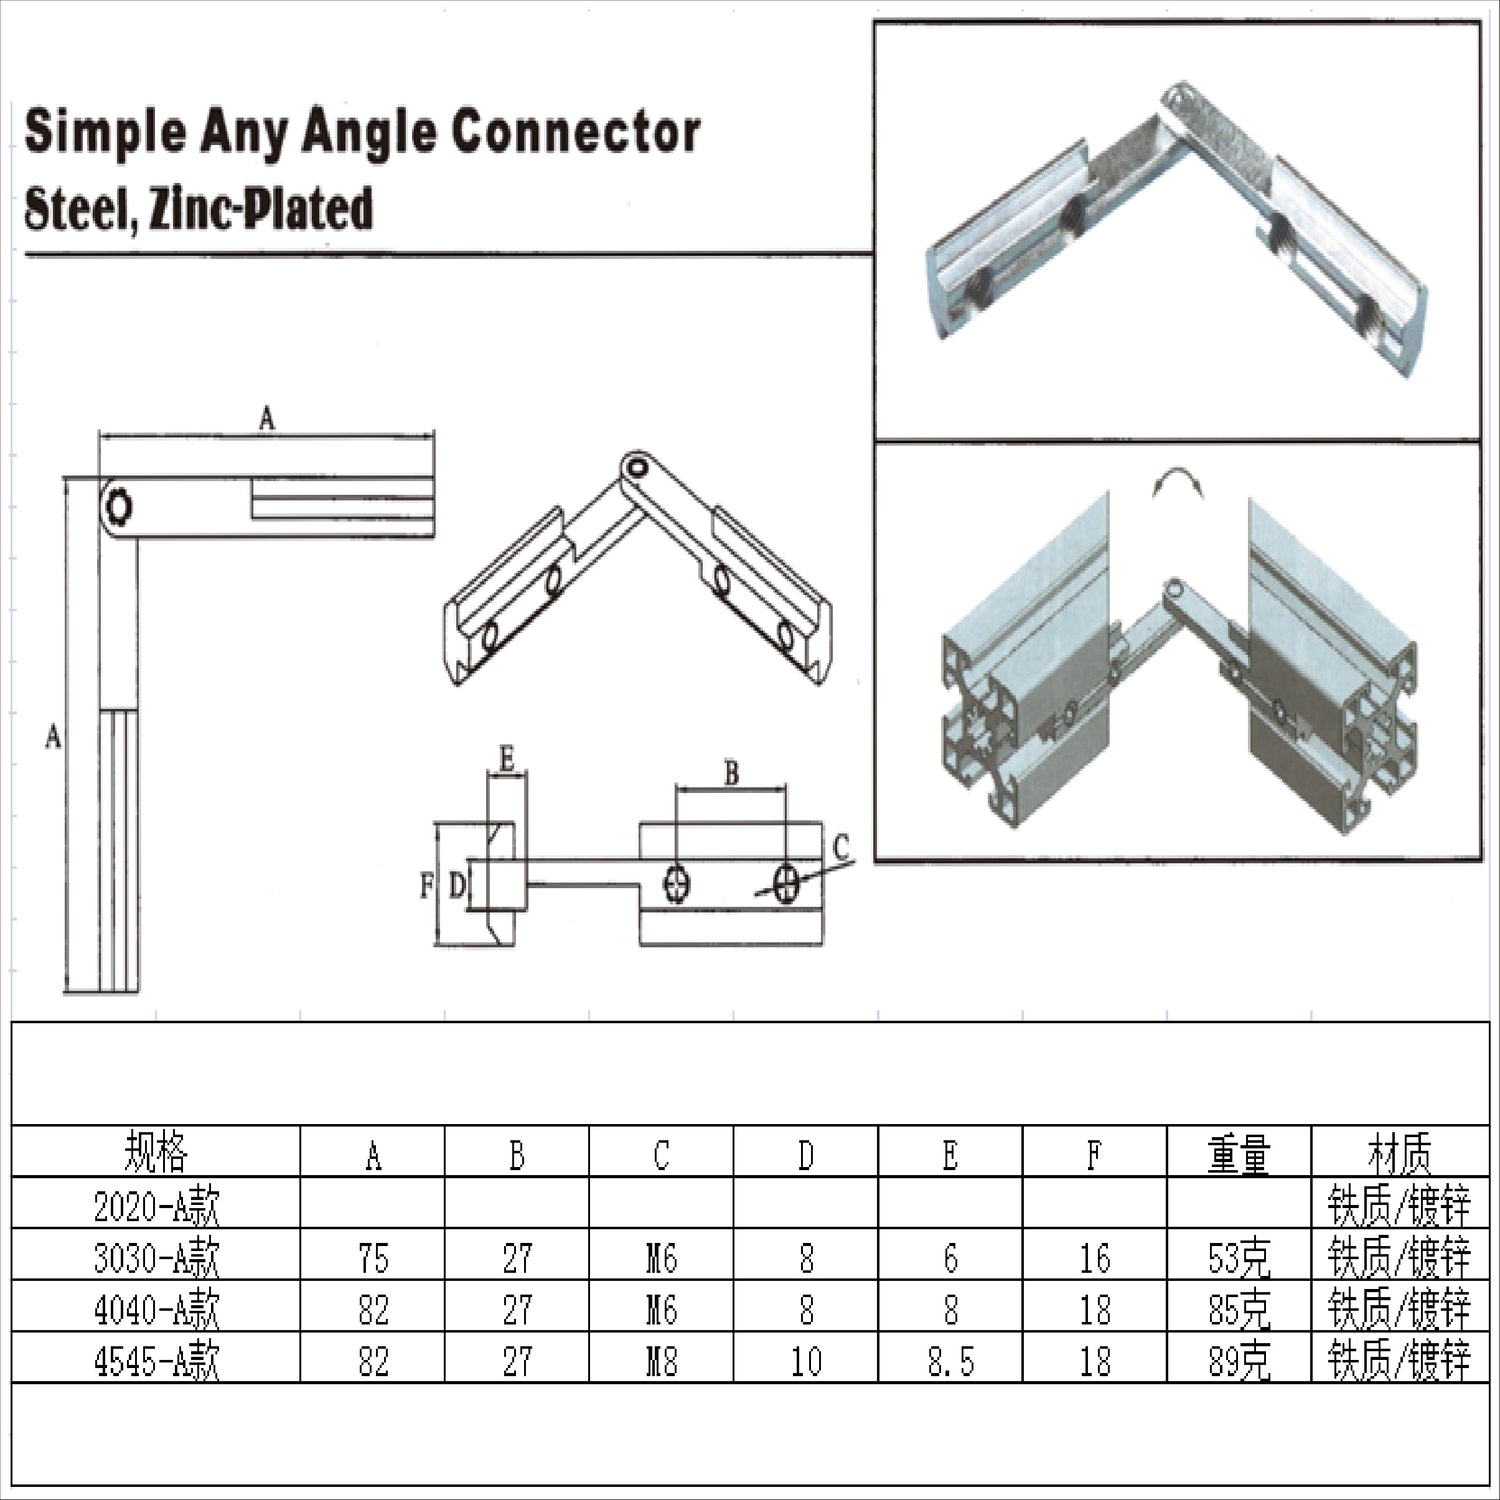 Simple Any Angle Connector  40 series type A